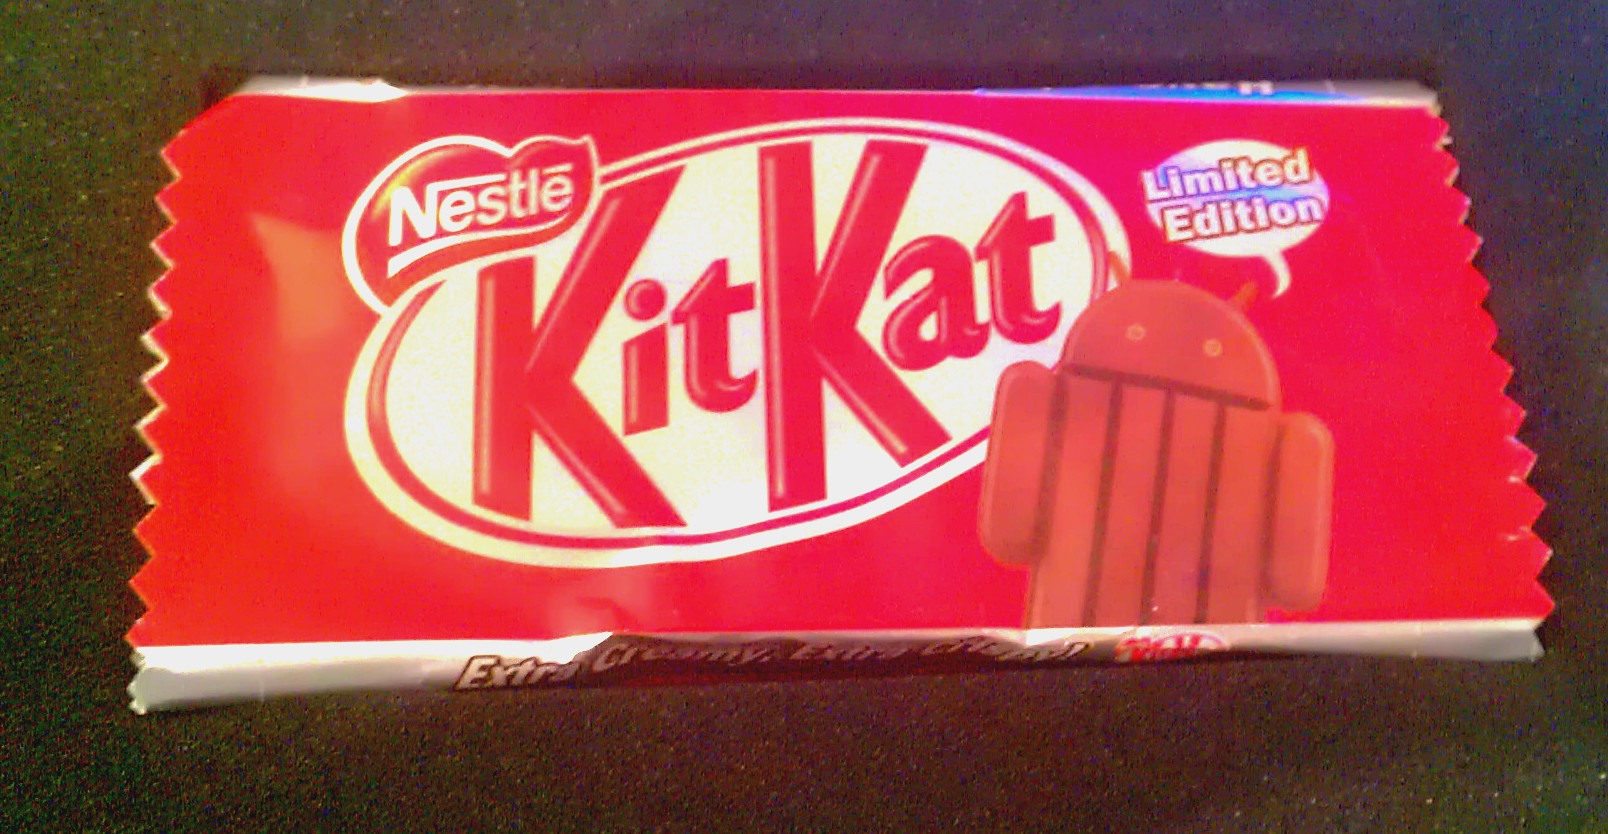 android-kit-kat-limited-edition